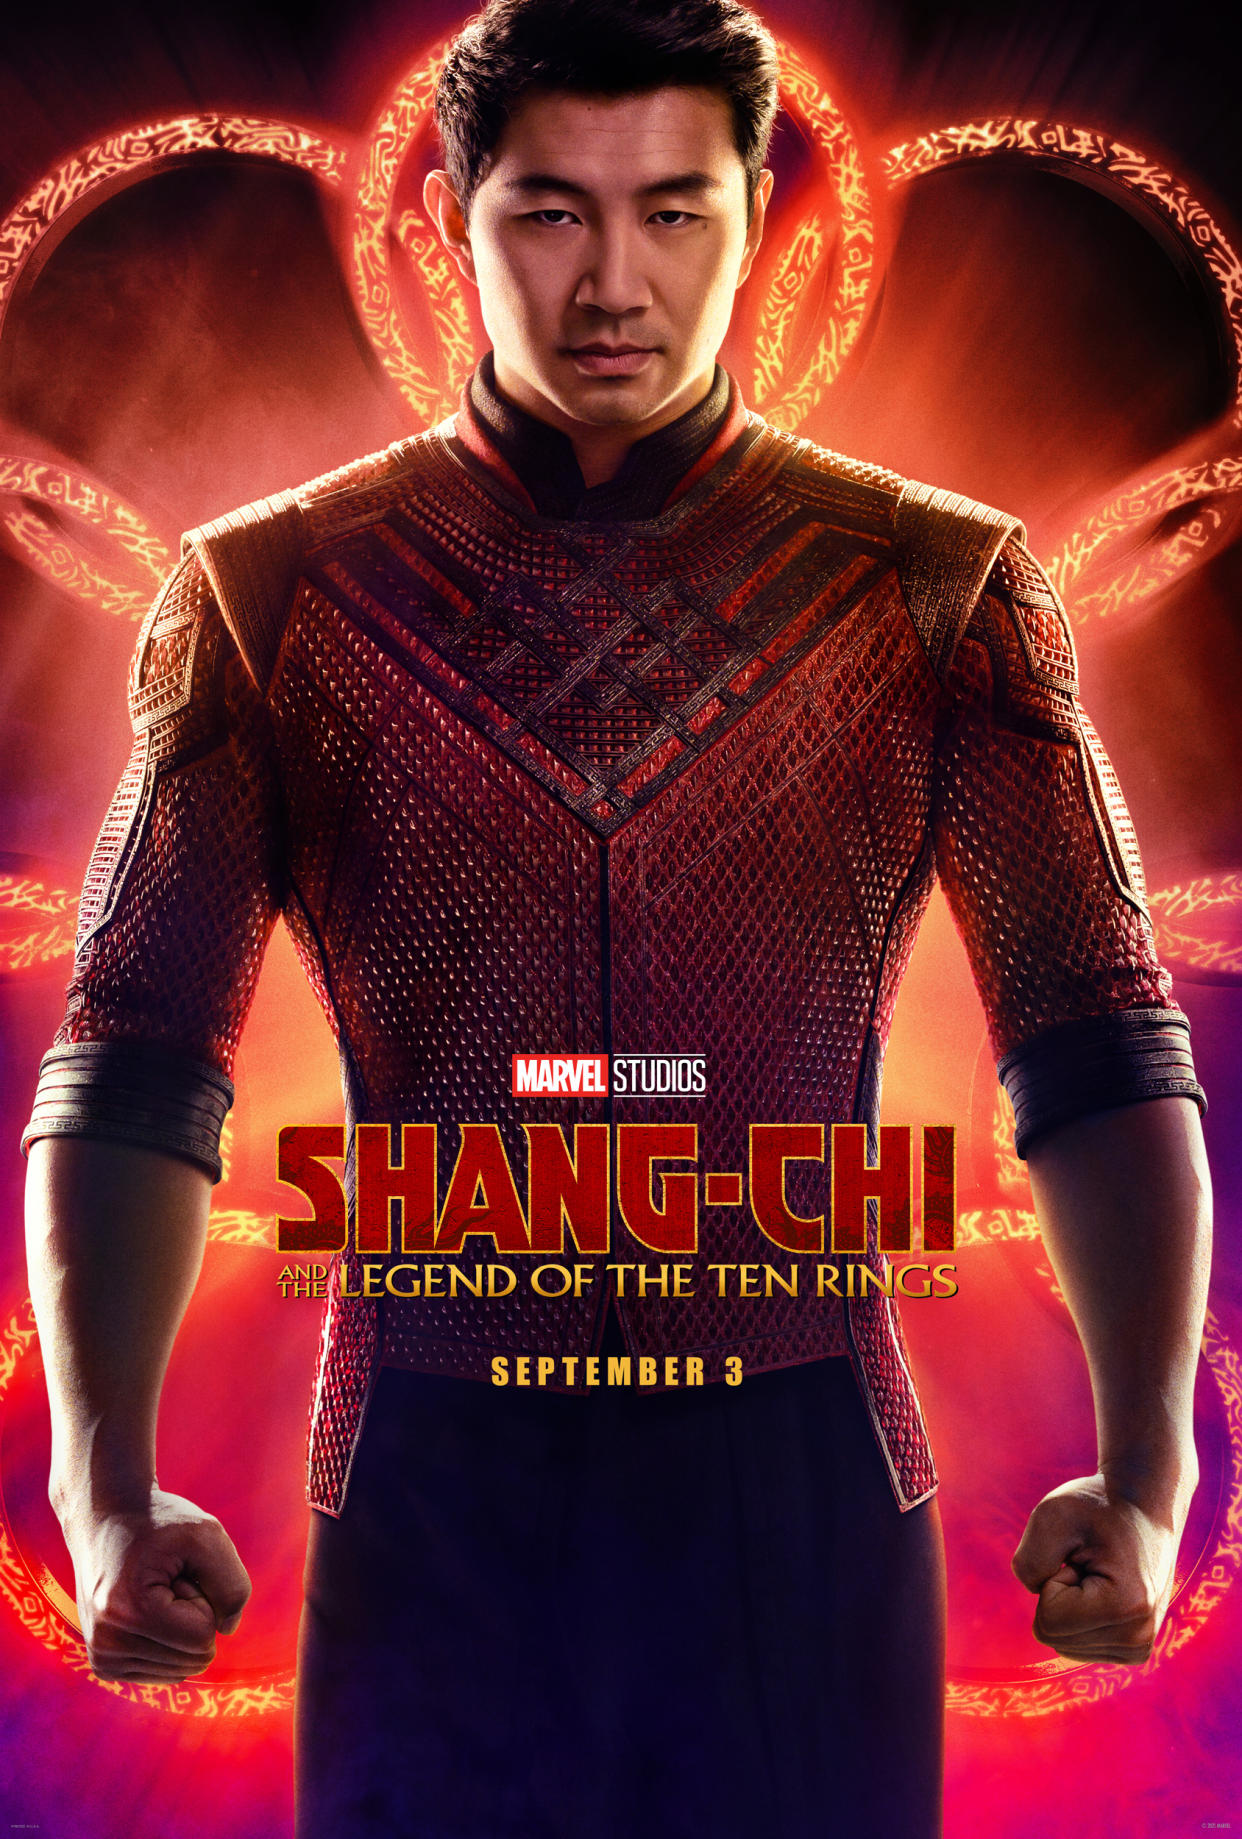 The poster for 'Shang-Chi and the Legend of the Ten Rings' (Photo: Marvel Studios)